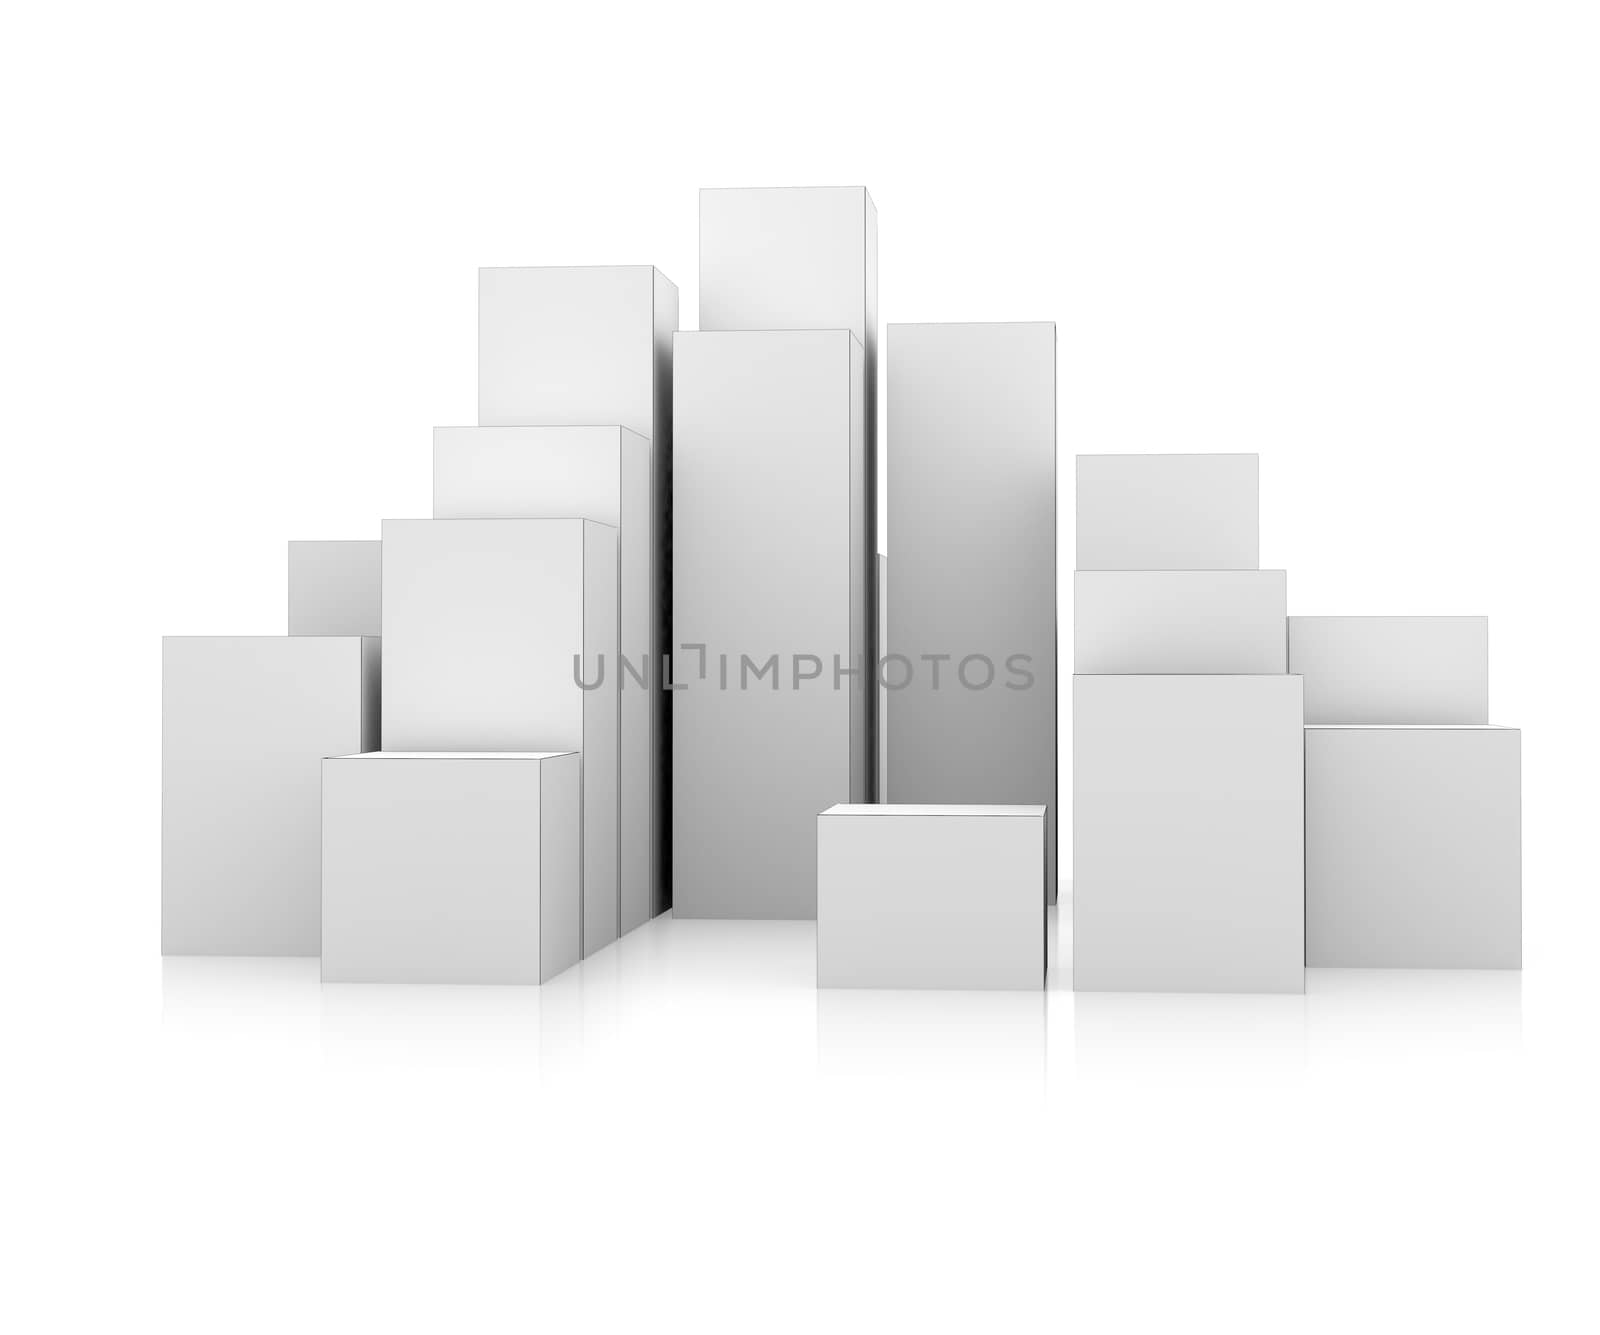 Abstract 3d illustration of white boxes by cherezoff